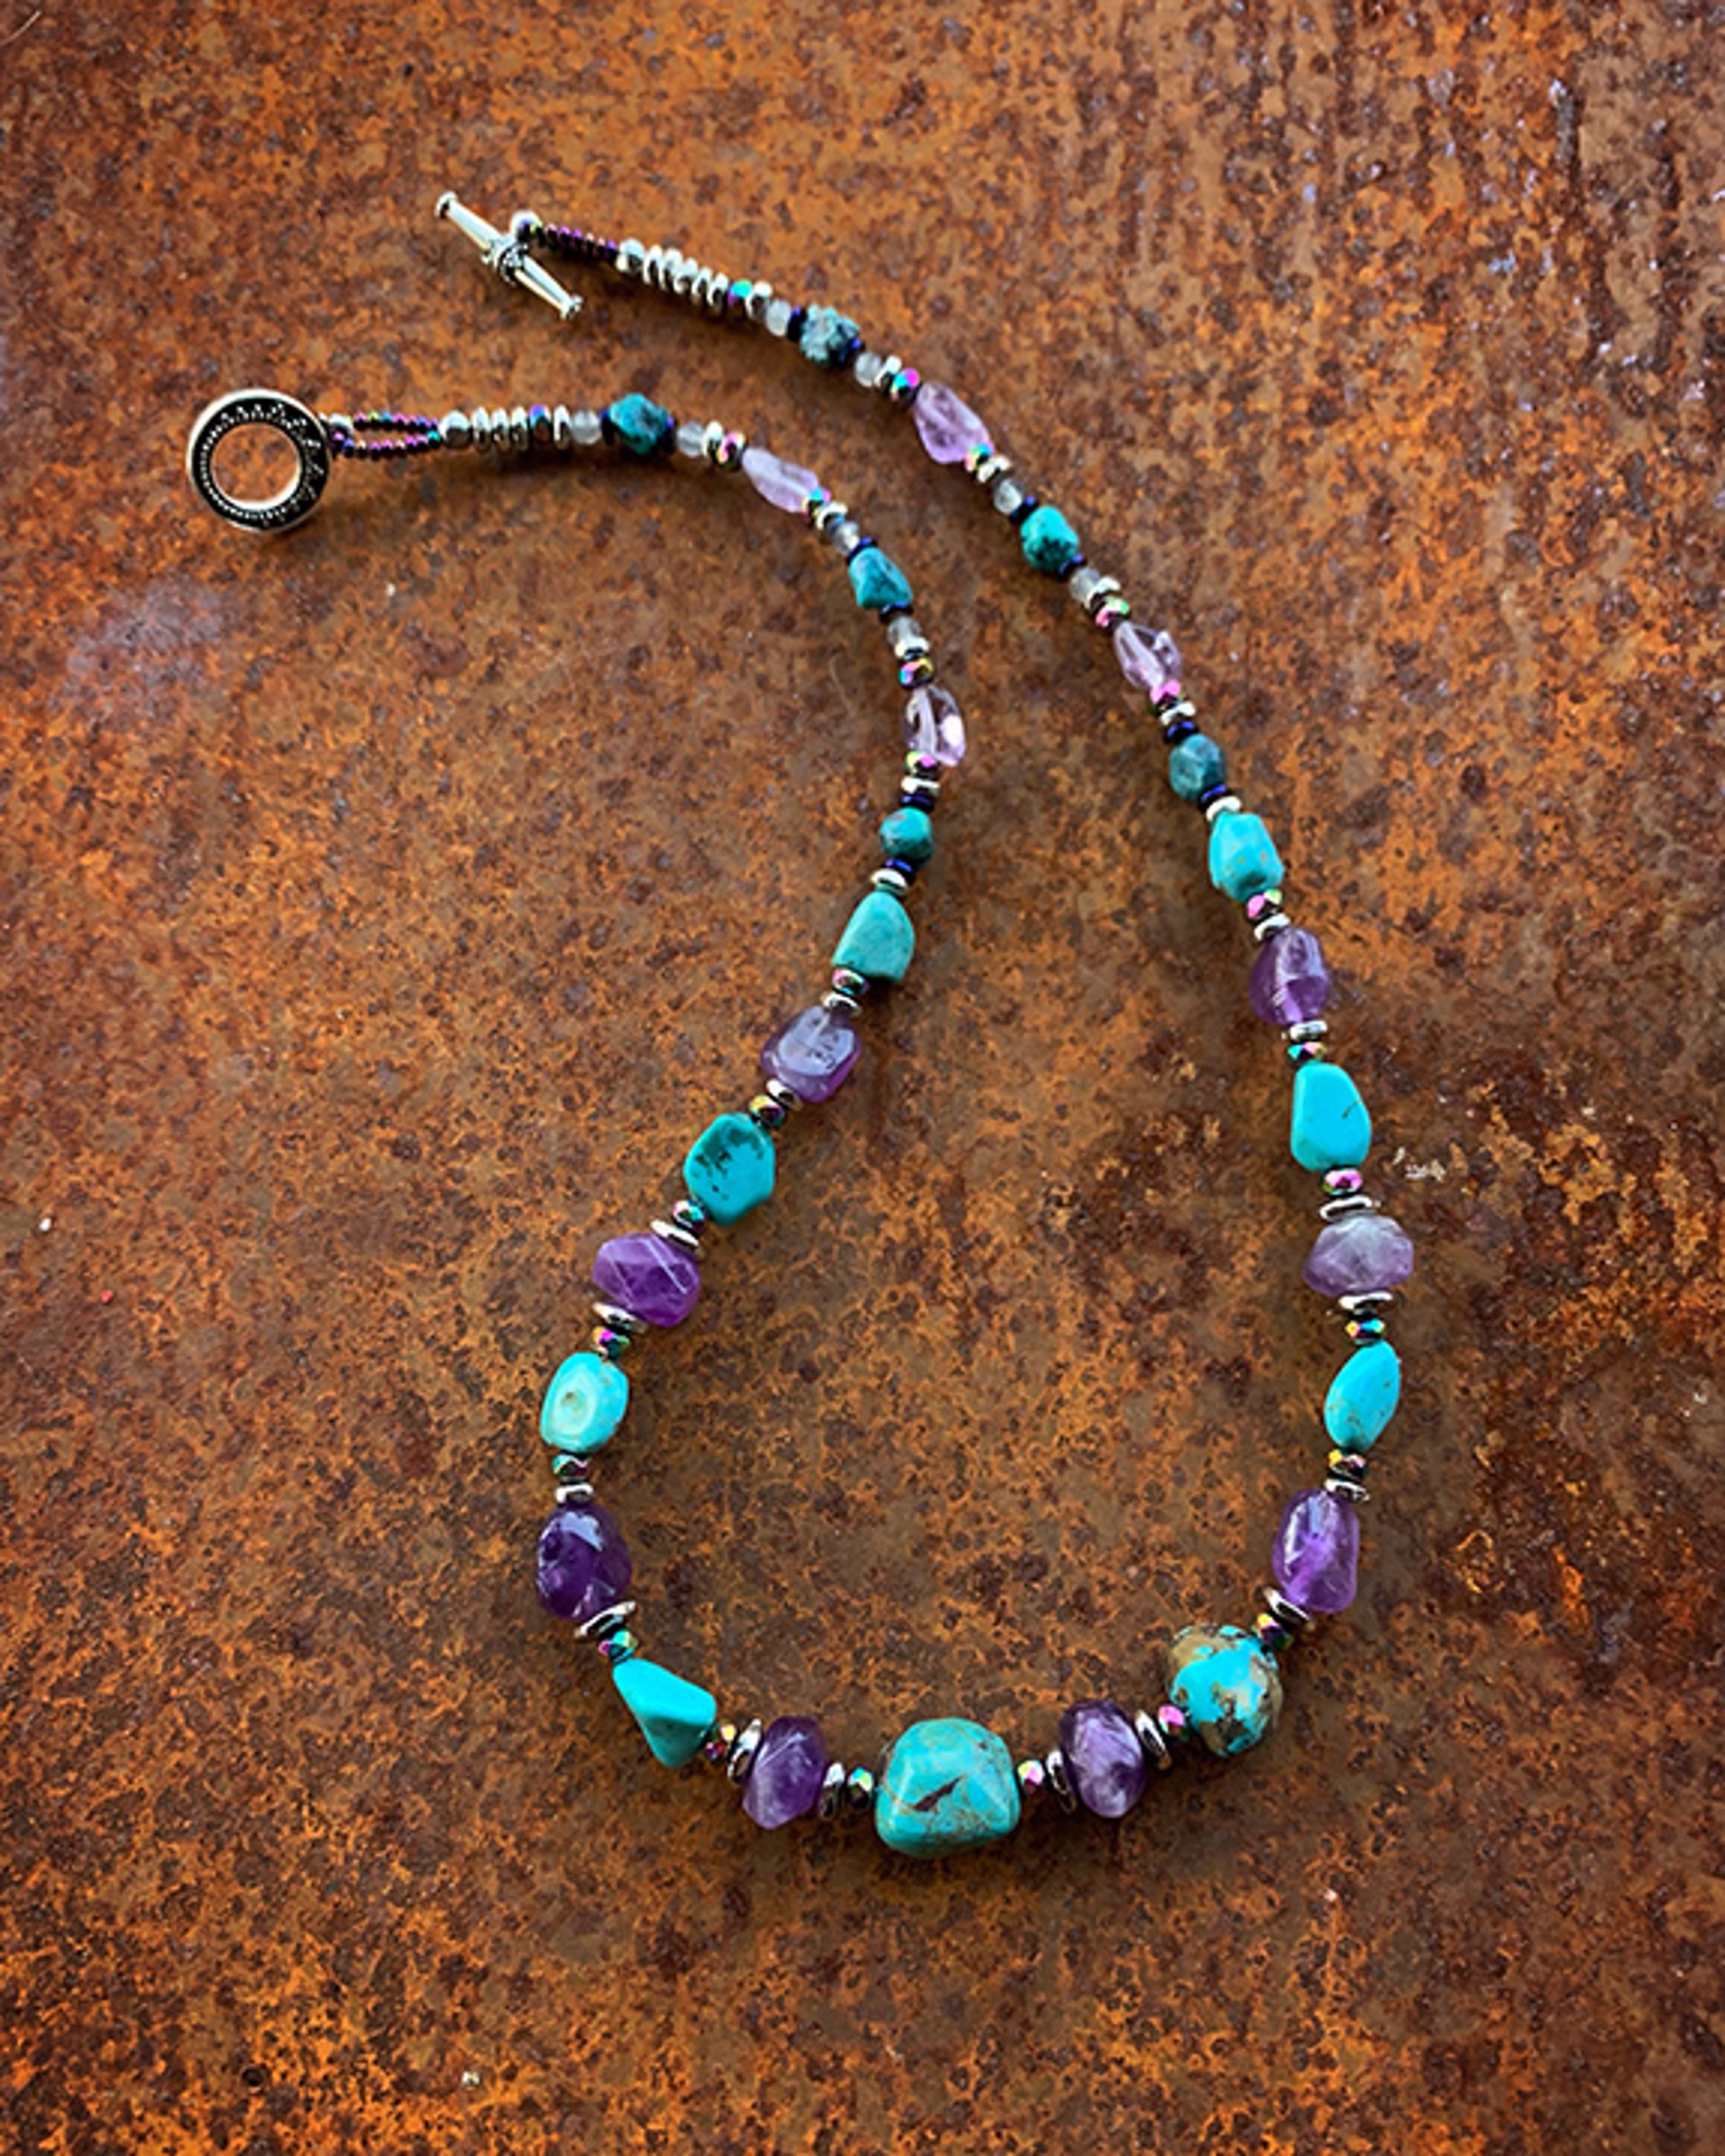 K731	Turquoise and Amethyst Necklace by Kelly Ormsby